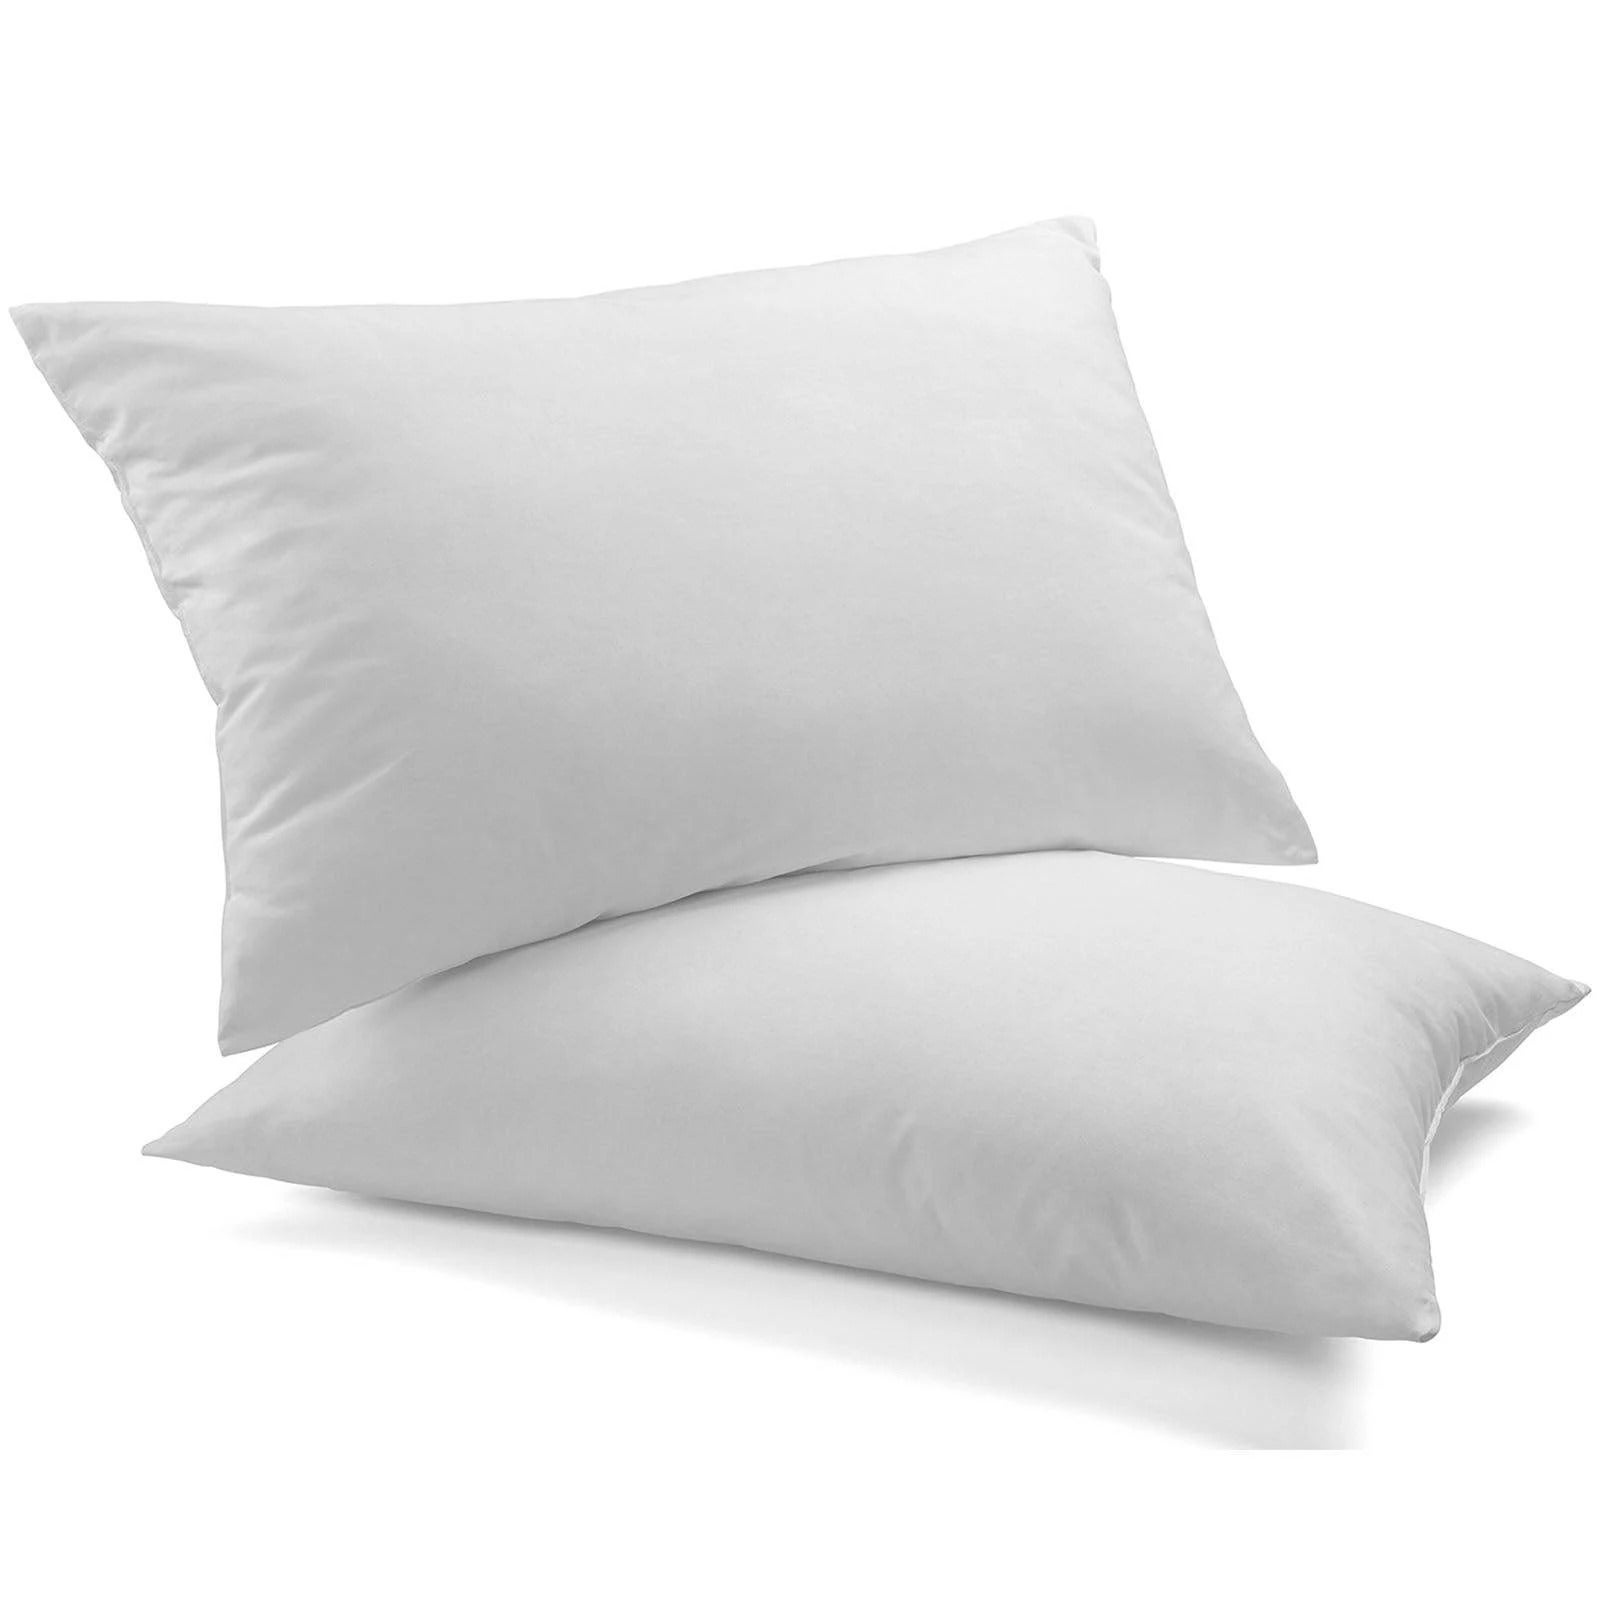 Royal Comfort Goose Feather Pillow Twin Pack 1000GSM